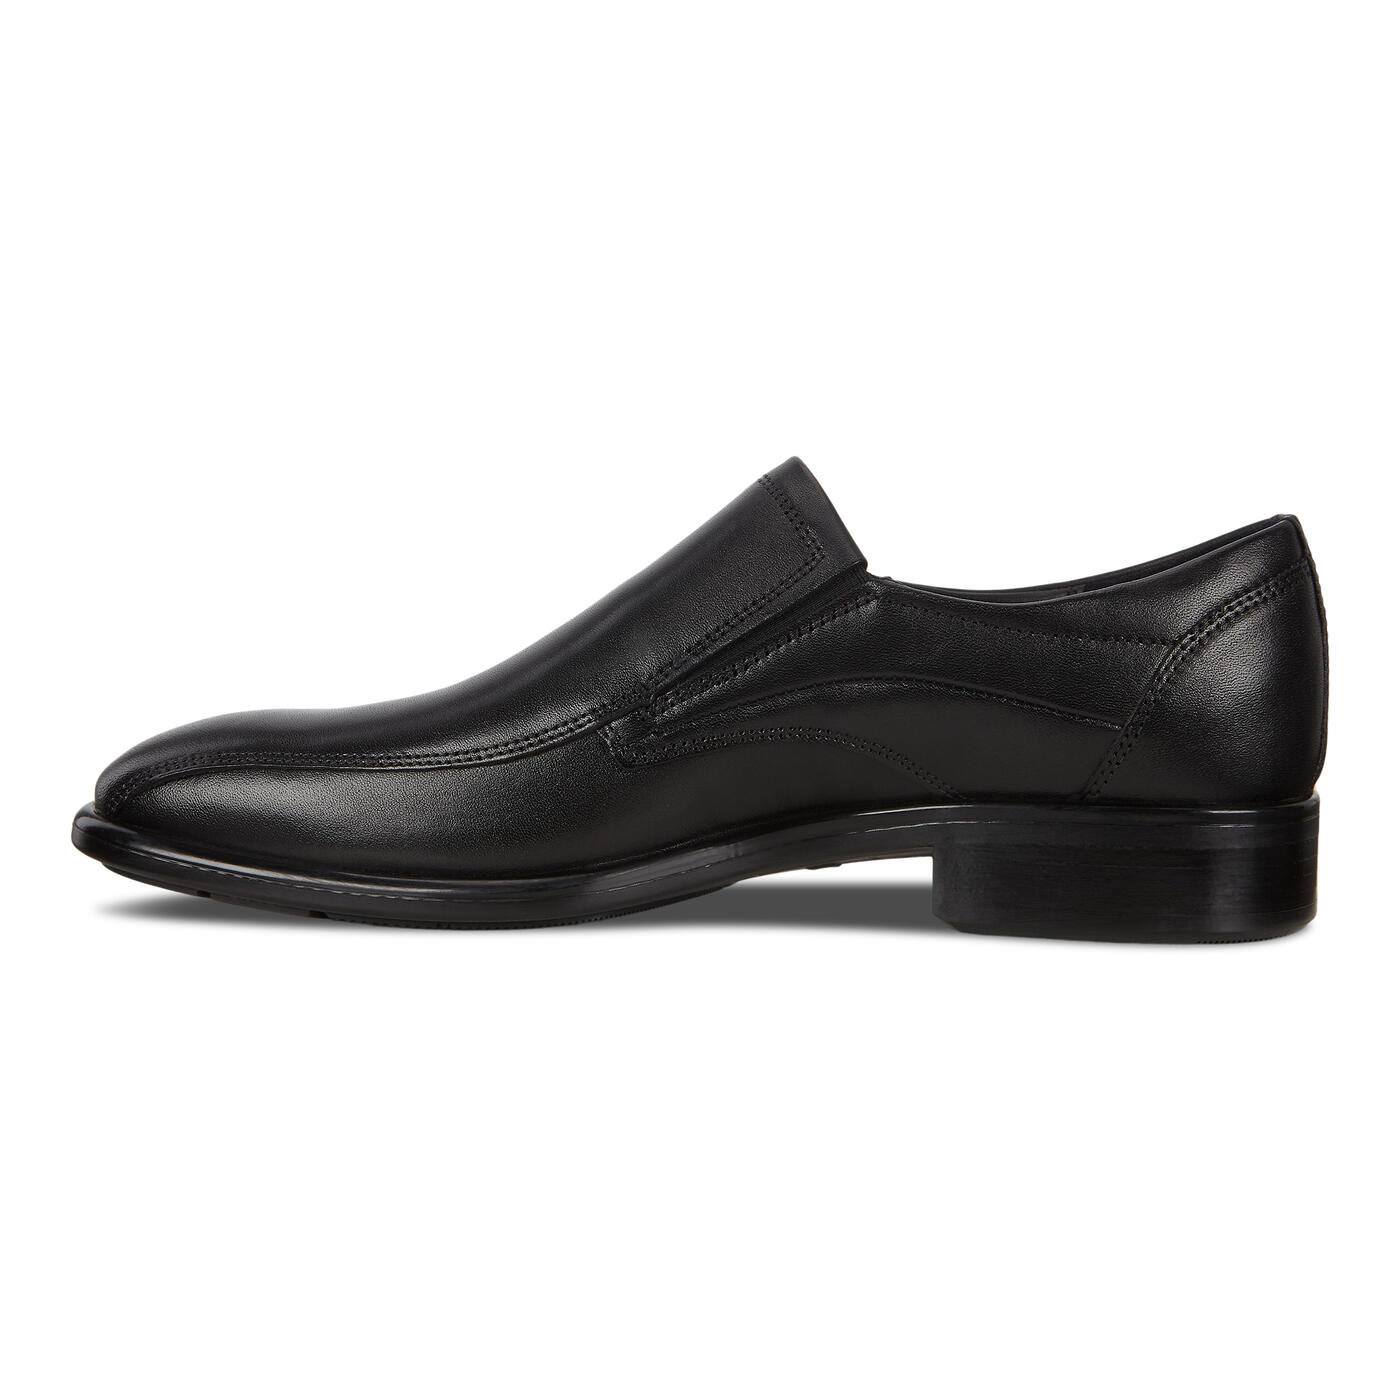 Men's Citytray Slip On Dress Shoes | Official Store | ECCO®